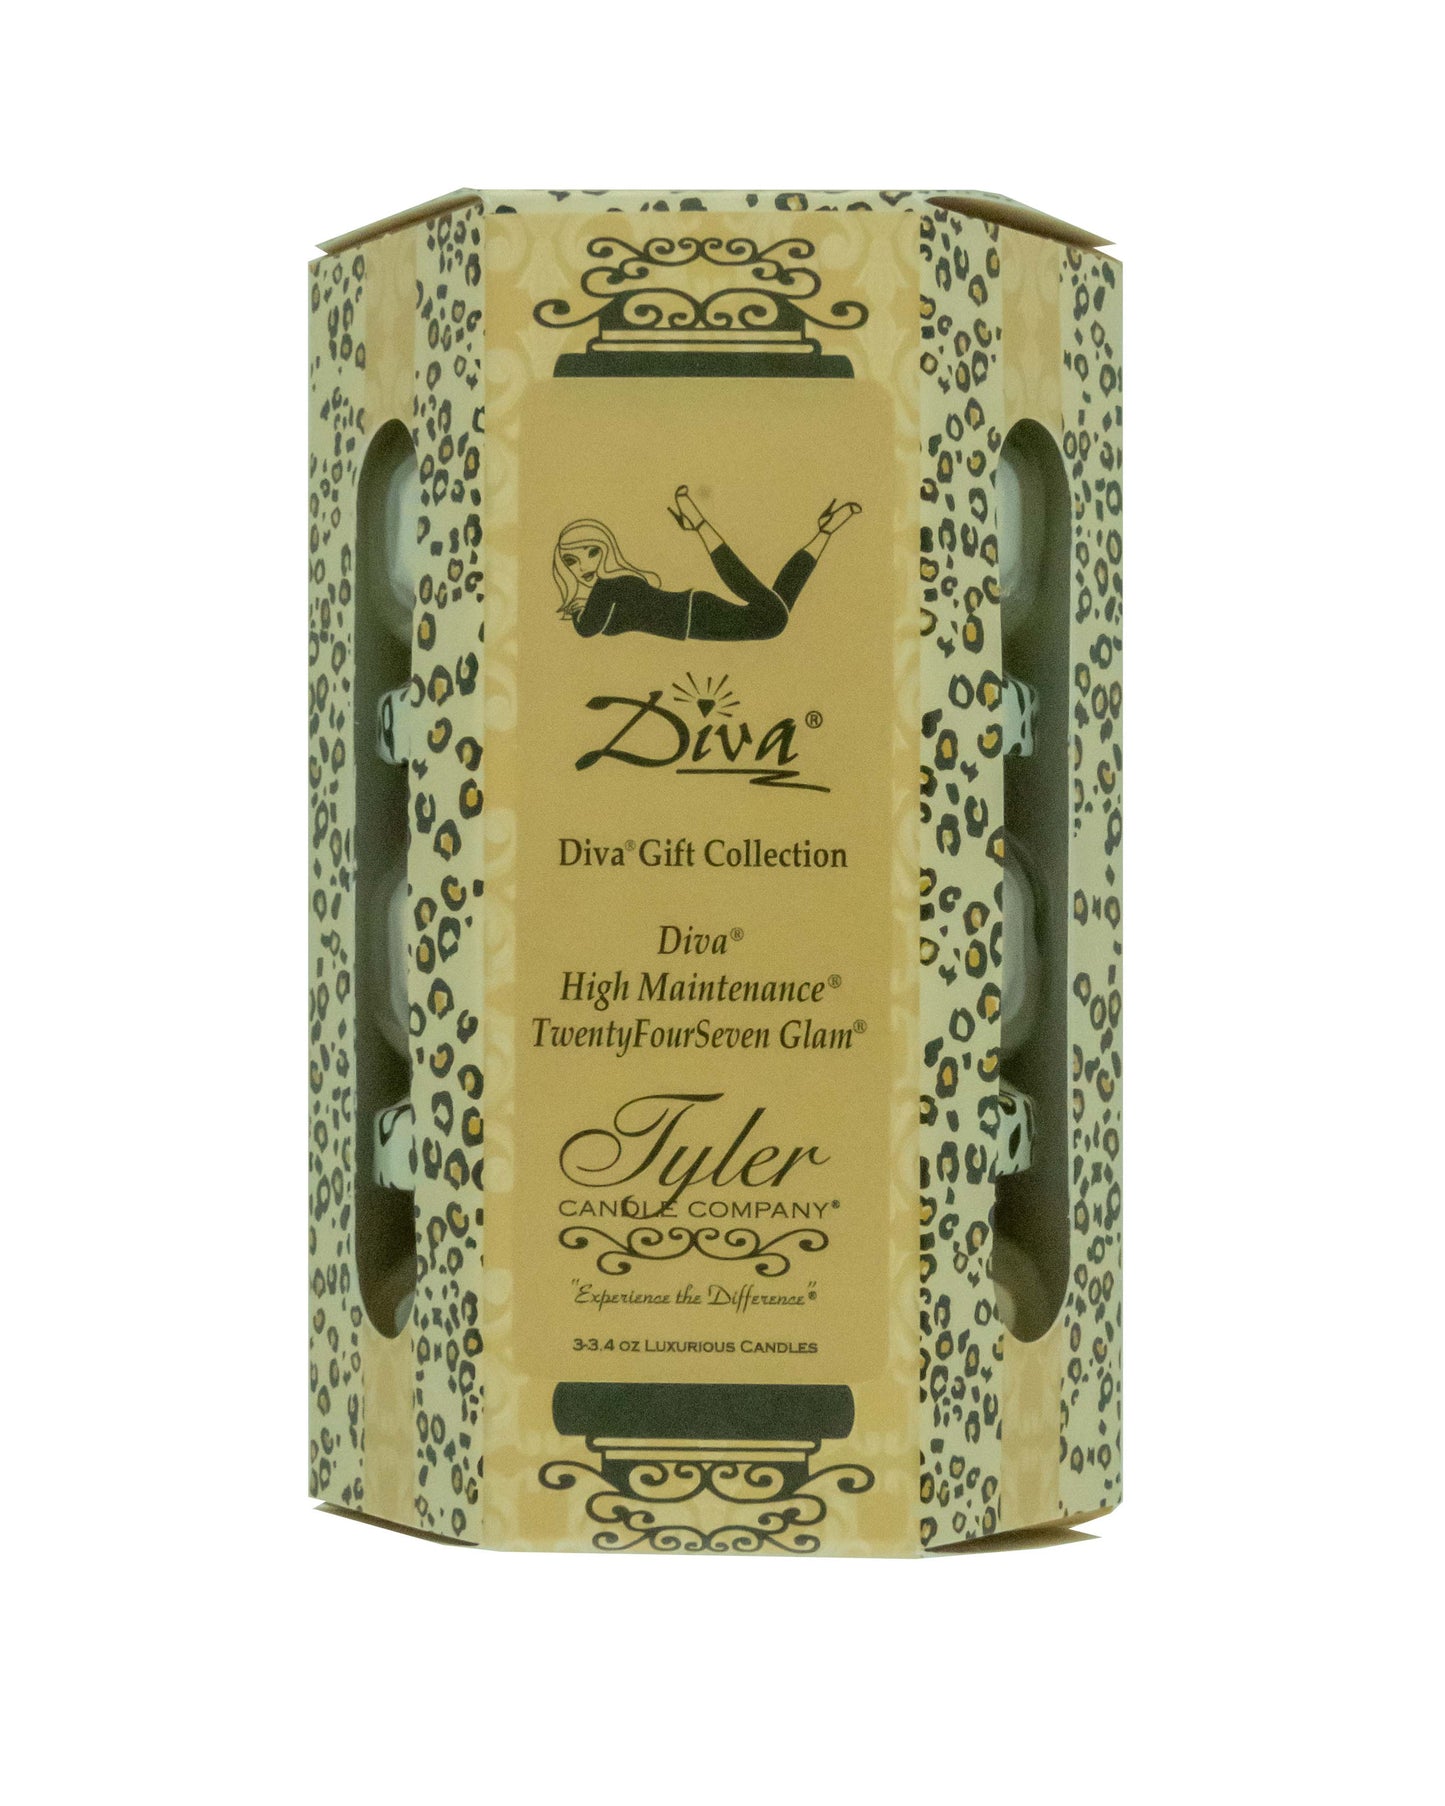 DIVA Gift Collections by Tyler